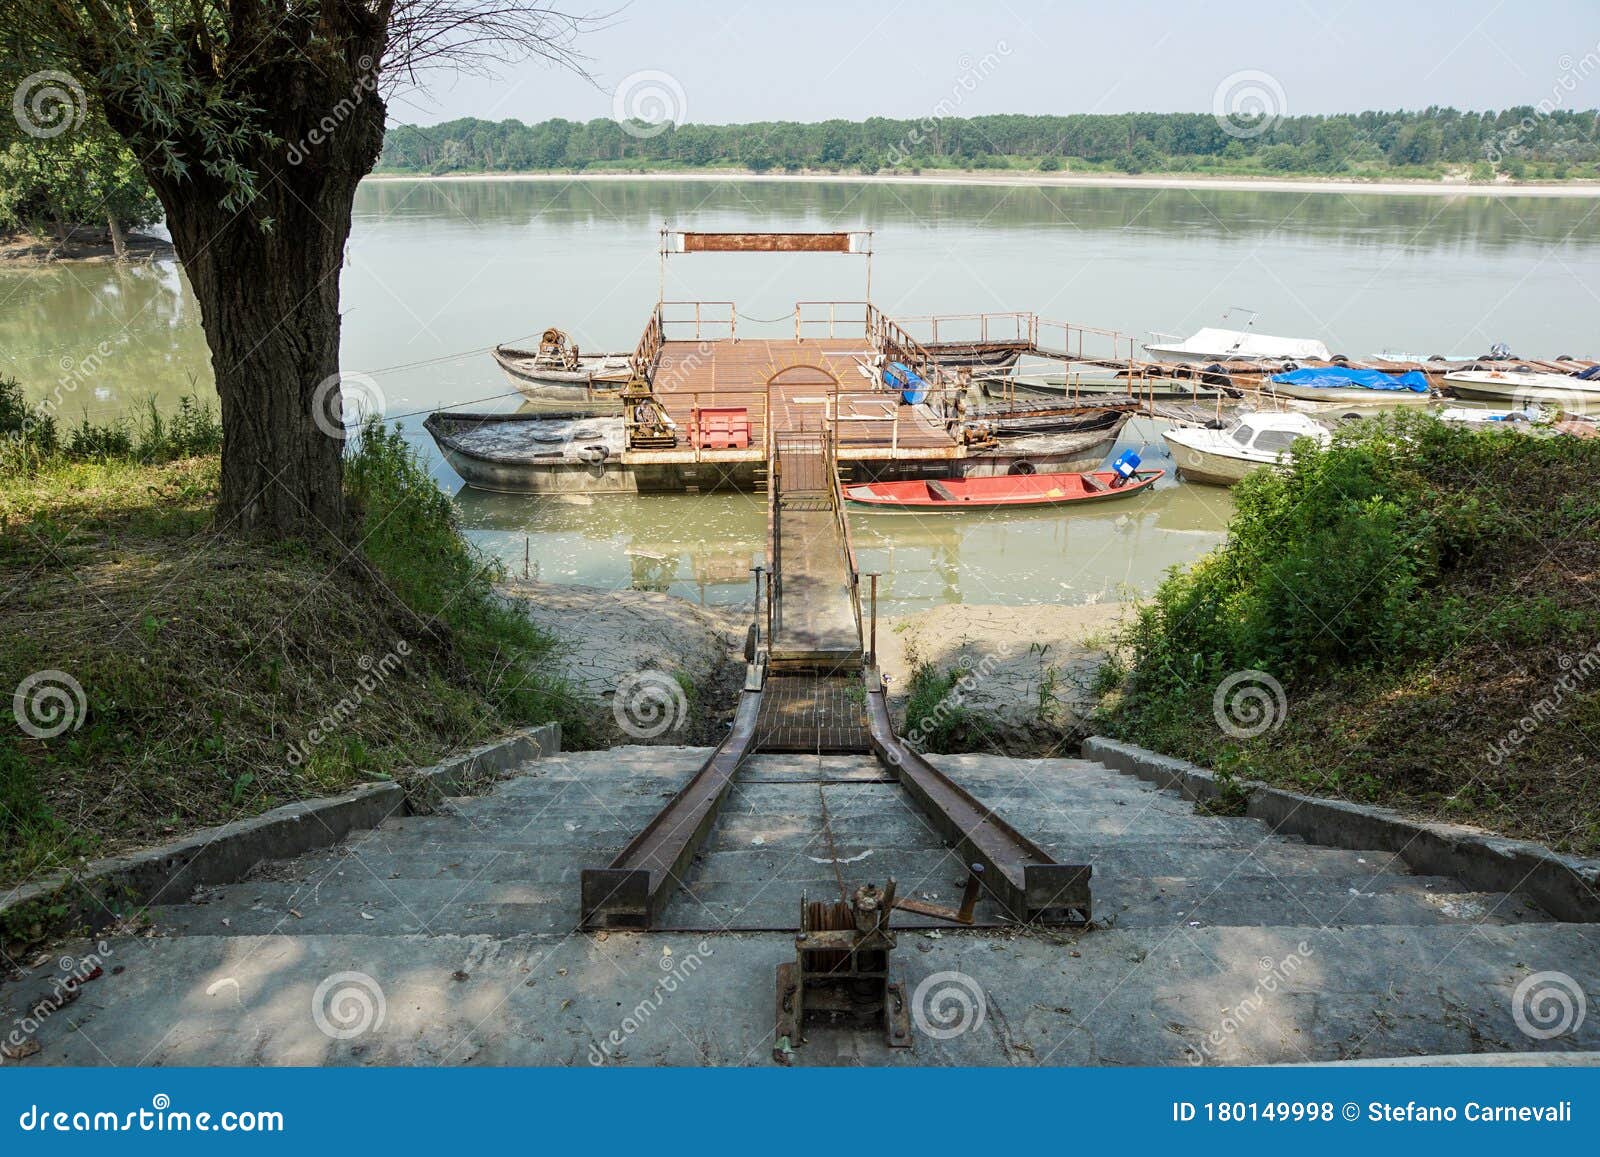 Traditional Fishing Boats Tied Up on the Floating Dock in